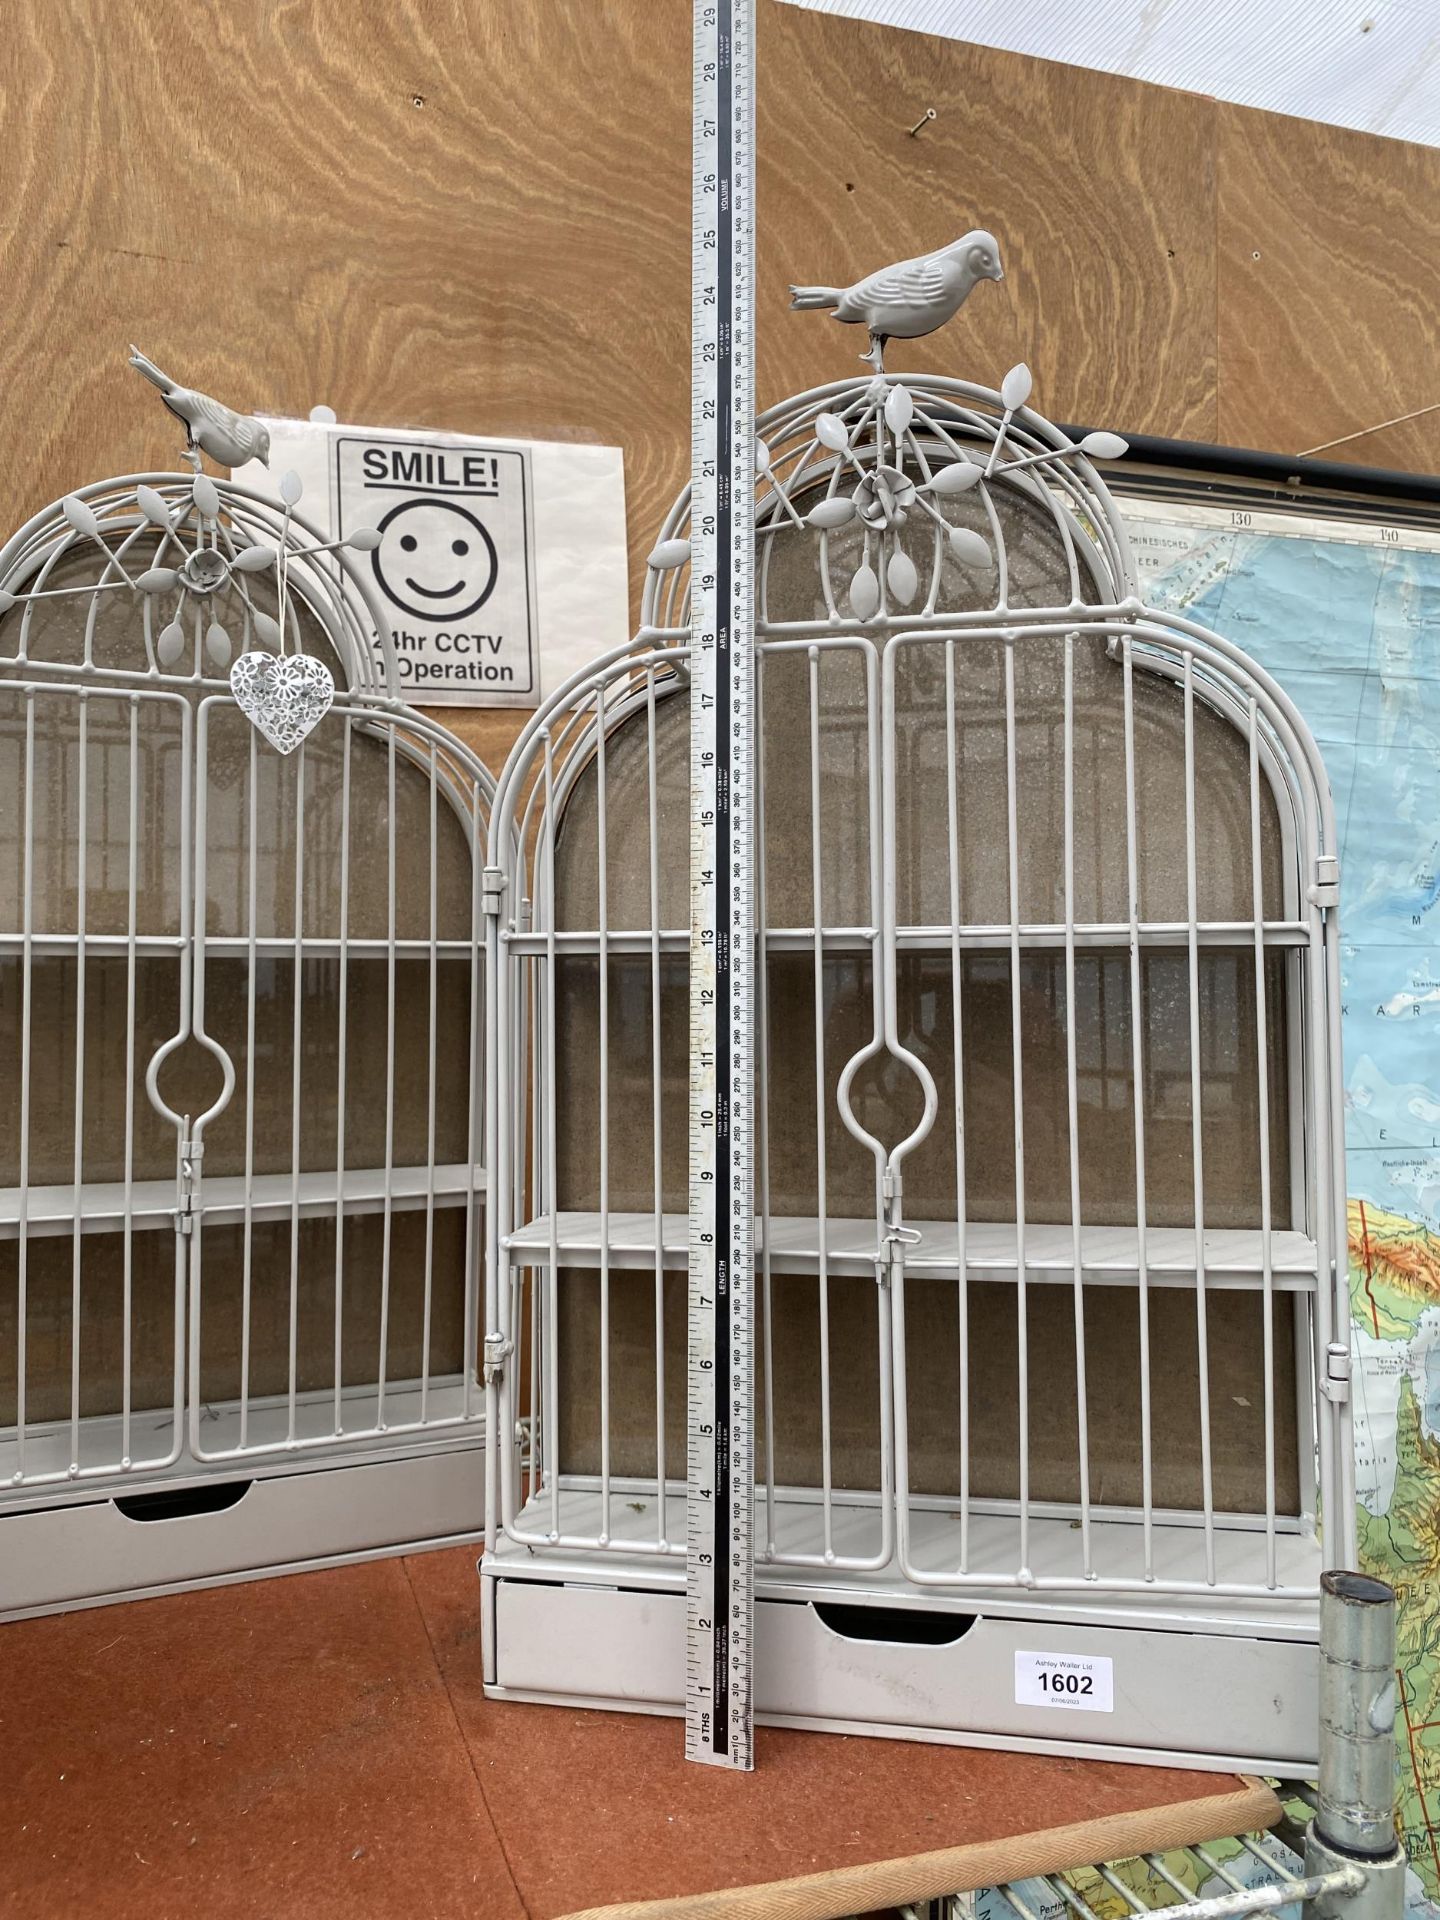 TWO METAL BIRD CAGE STYLE SHELVING UNITS - Image 3 of 3